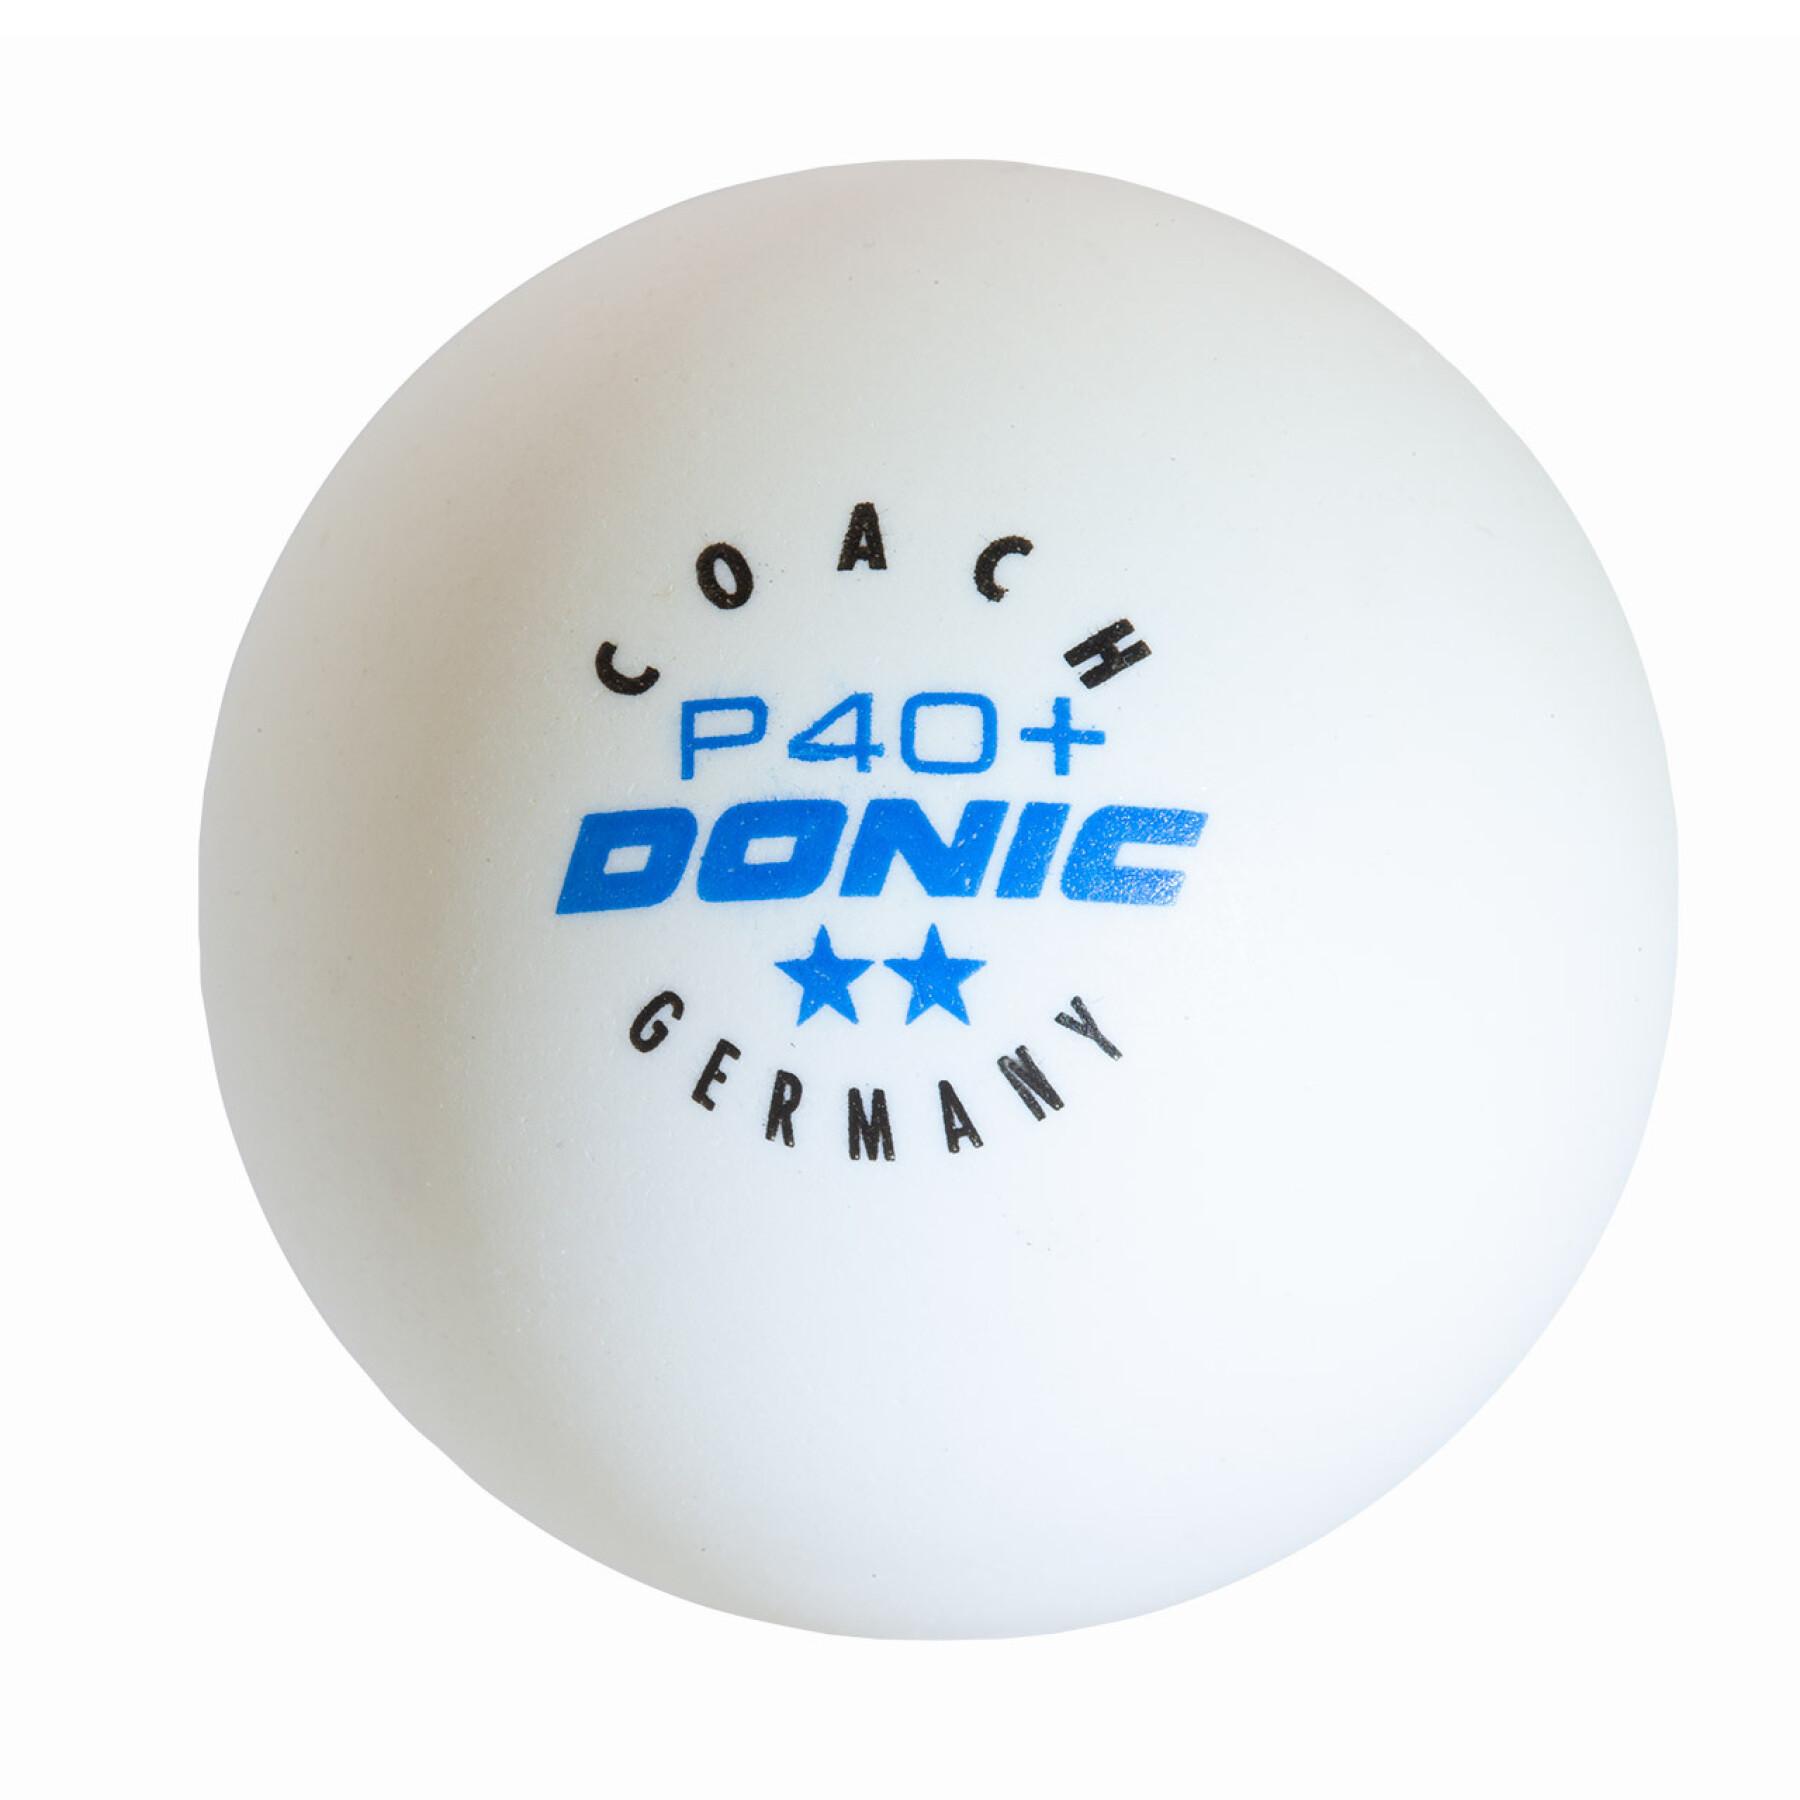 Pack of 6 table tennis balls Donic Coach P40+** (40 mm)